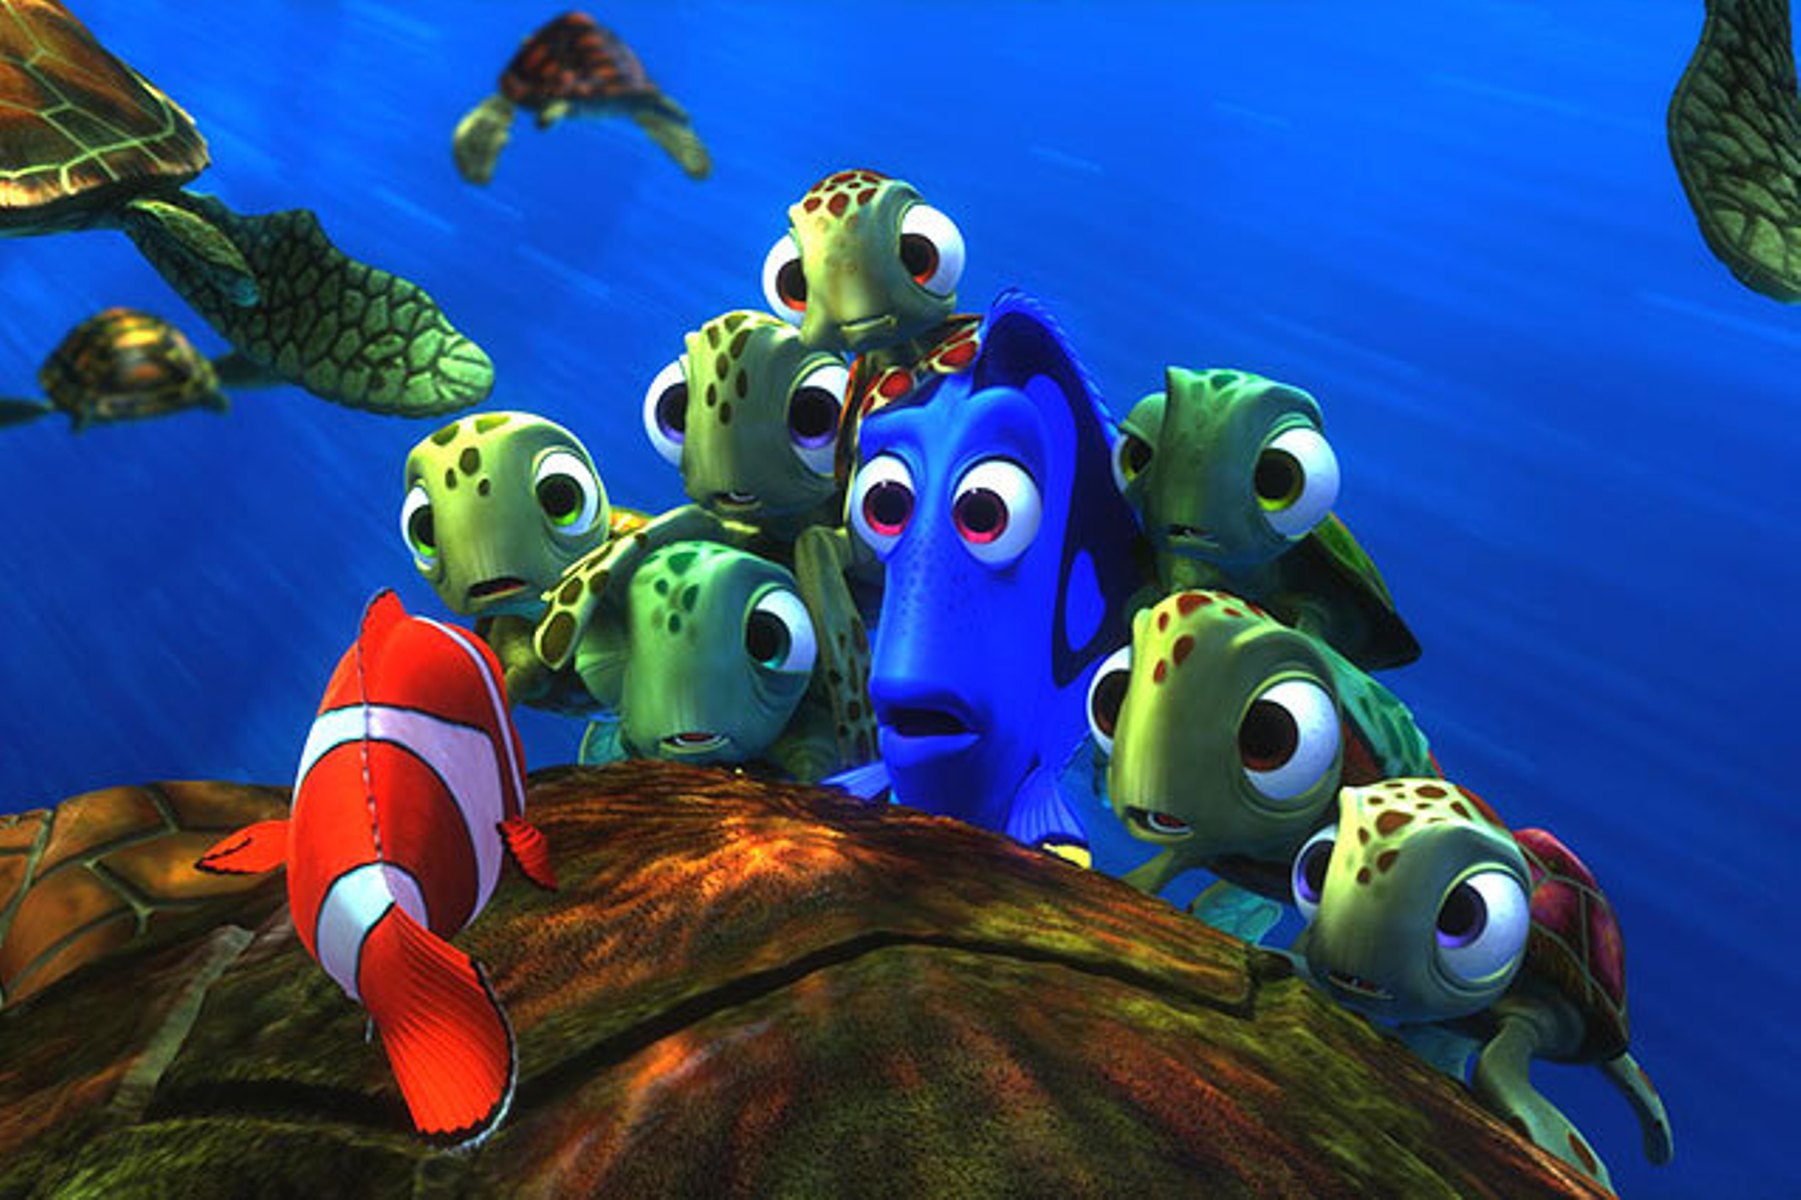 finding dory free online hd